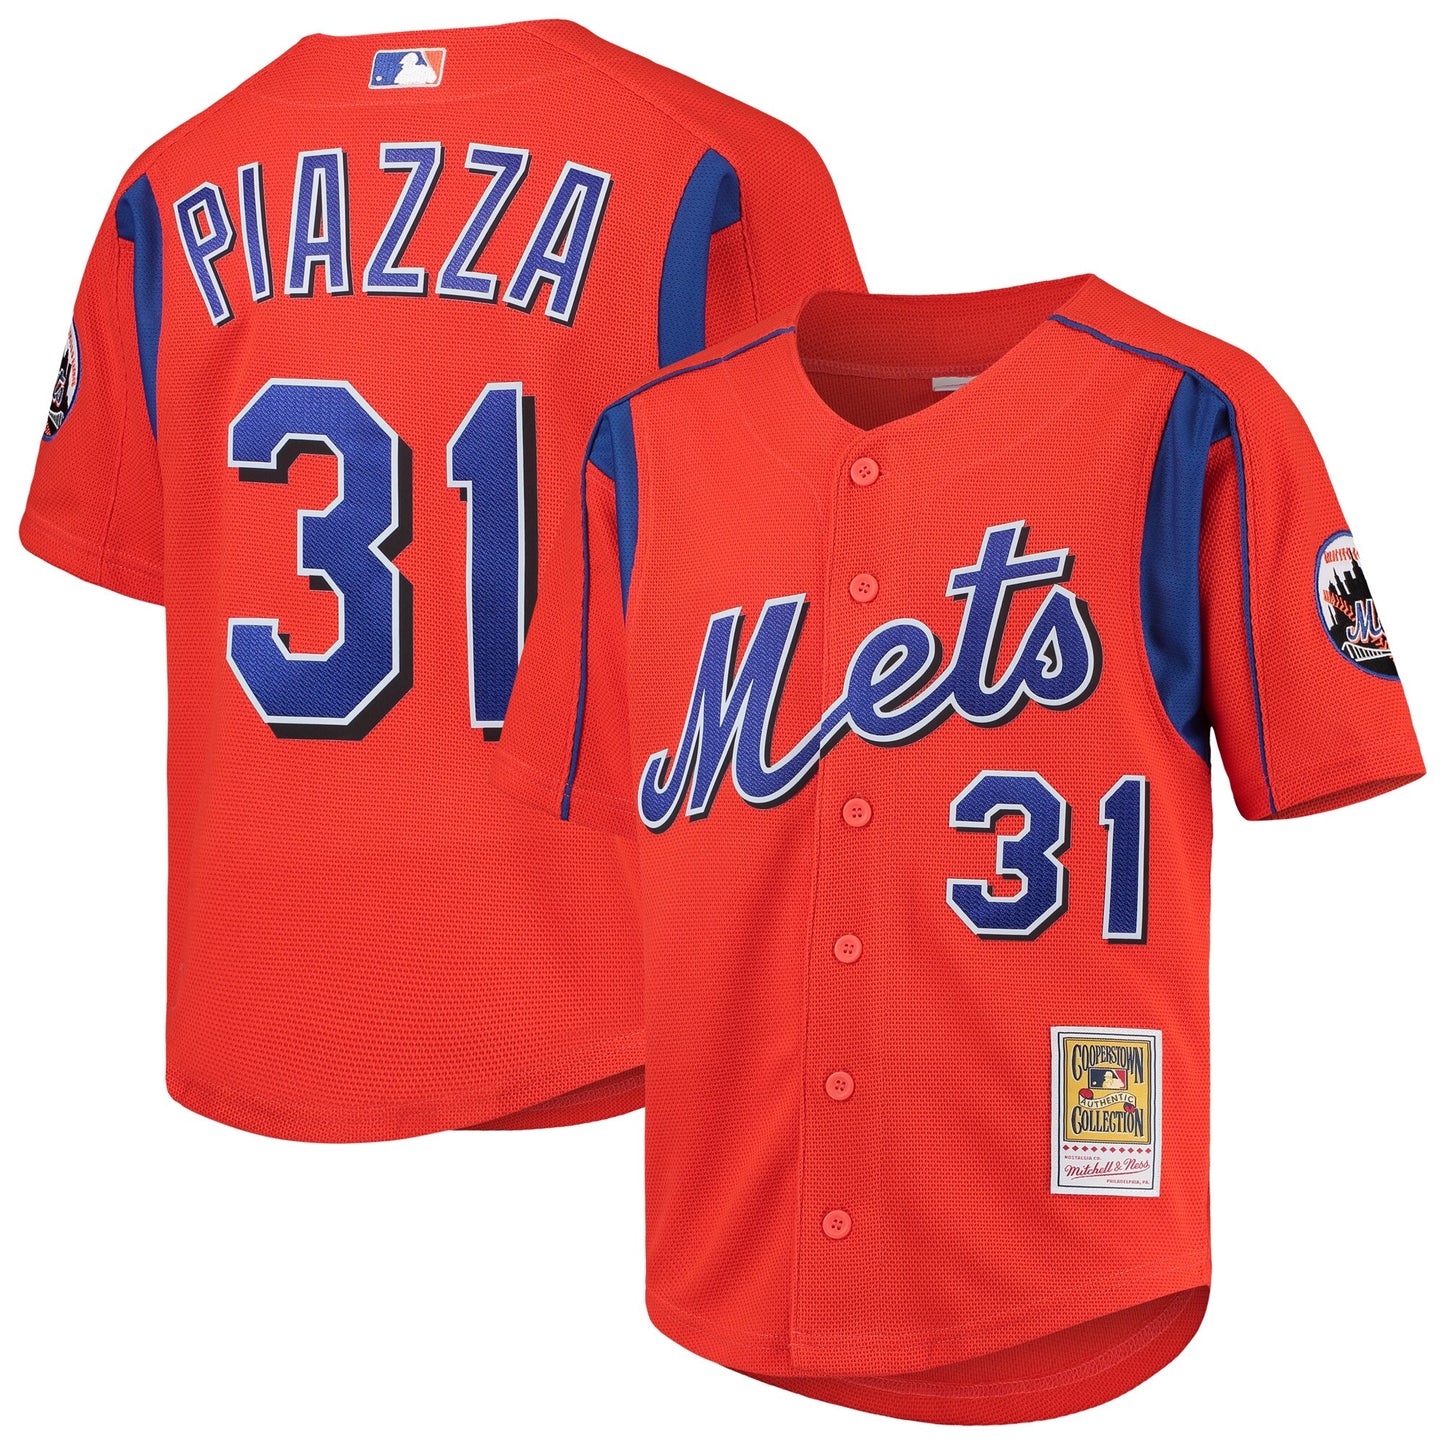 Mike Piazza New York Mets Mitchell & Ness Youth Cooperstown Collection Mesh Batting Practice Jersey - Orange